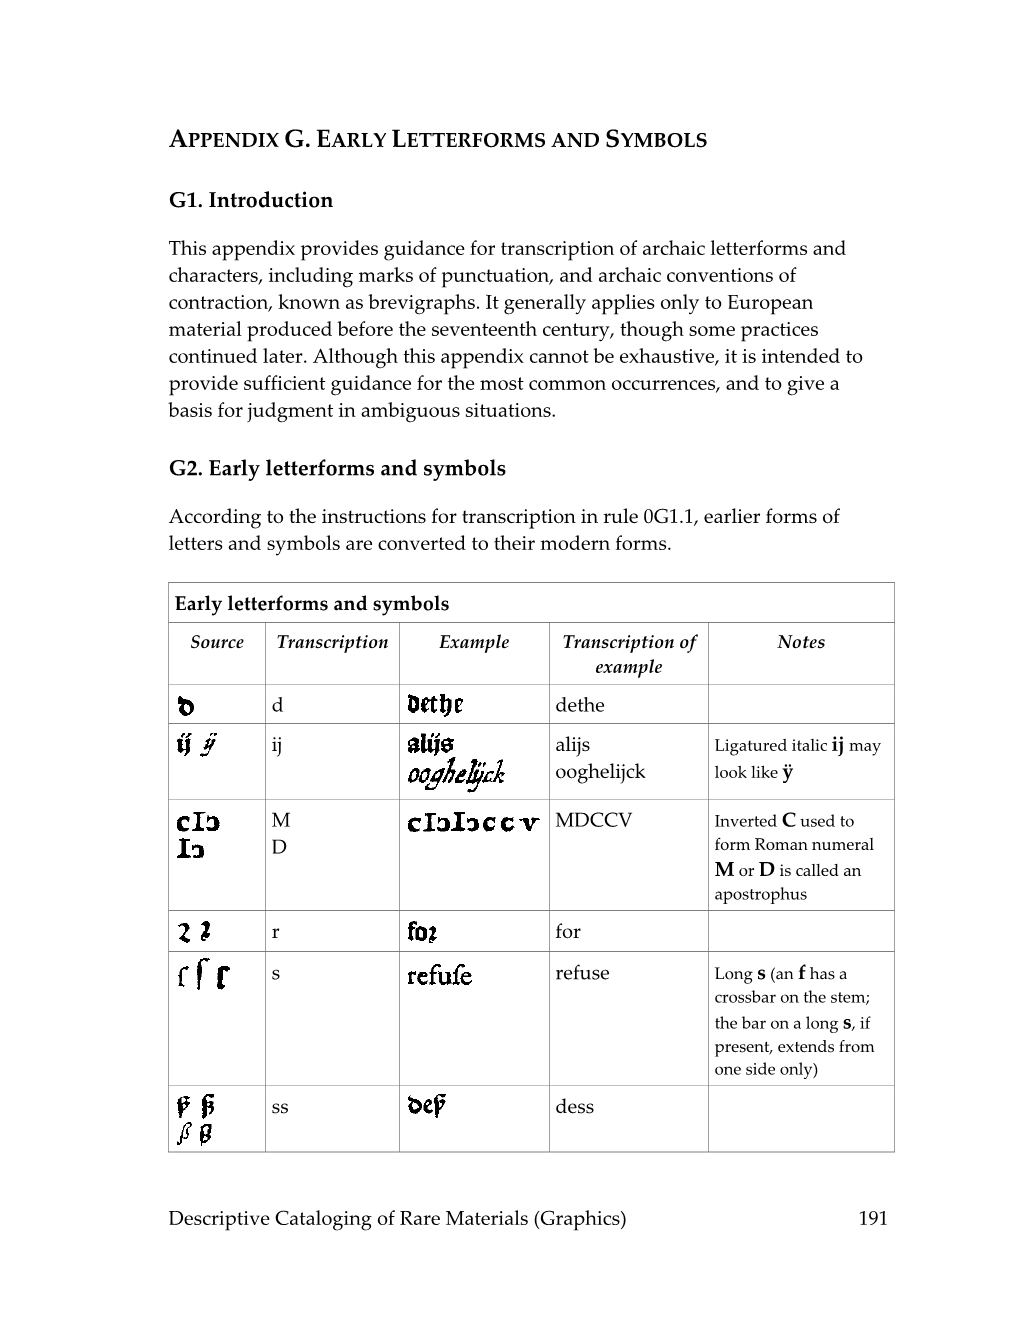 DCRM Appendix on Transcription Rules for Early Letterforms and Symbols